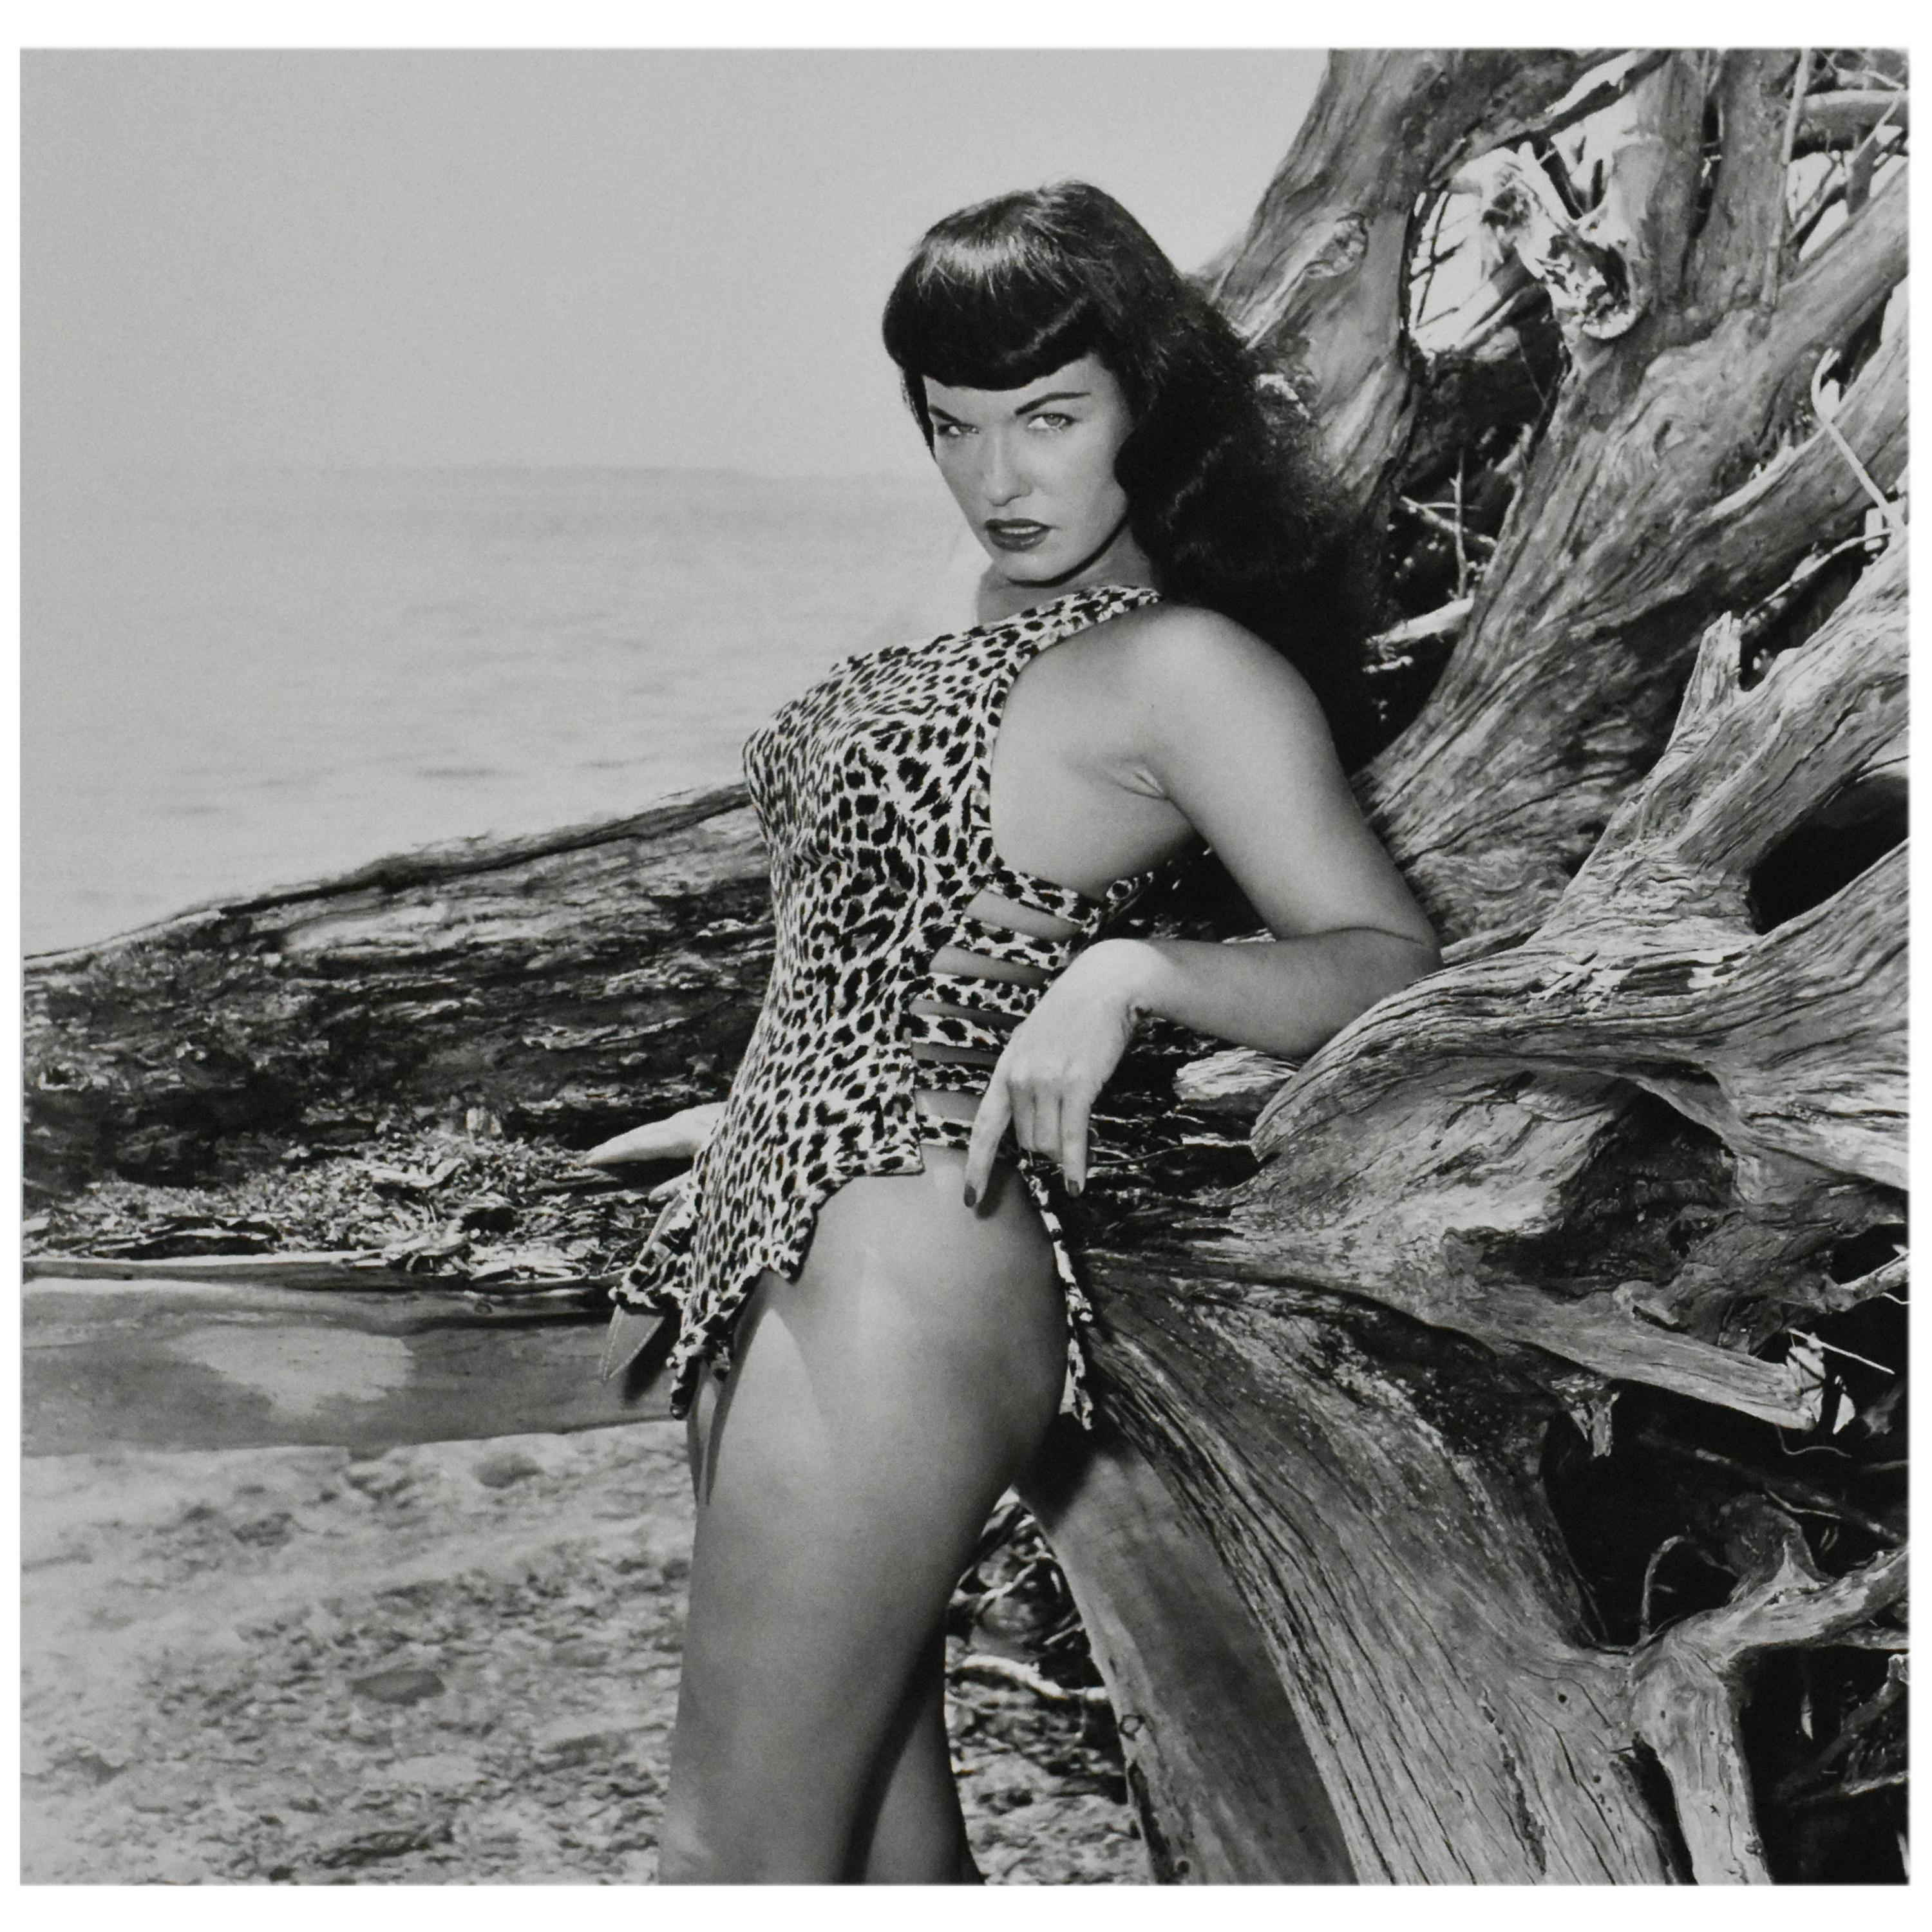 "Bettie Page with Driftwood, Key Biscayne, FL", 1954  - Photograph by Bunny Yeager